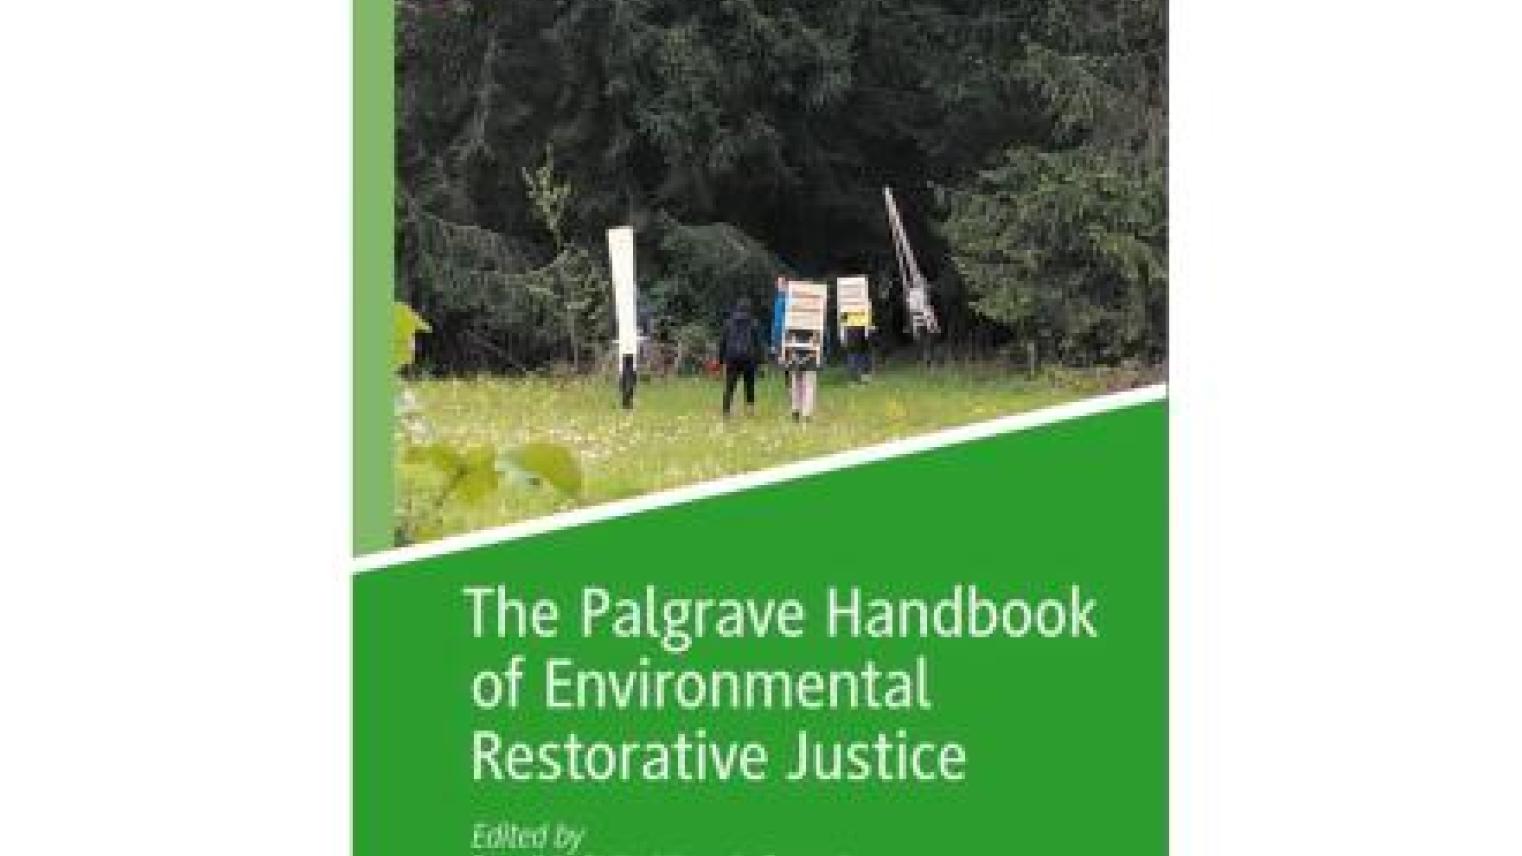 Image: Book cover, The Palgrave Handbook of Environmental Restorative Justice (Provided)